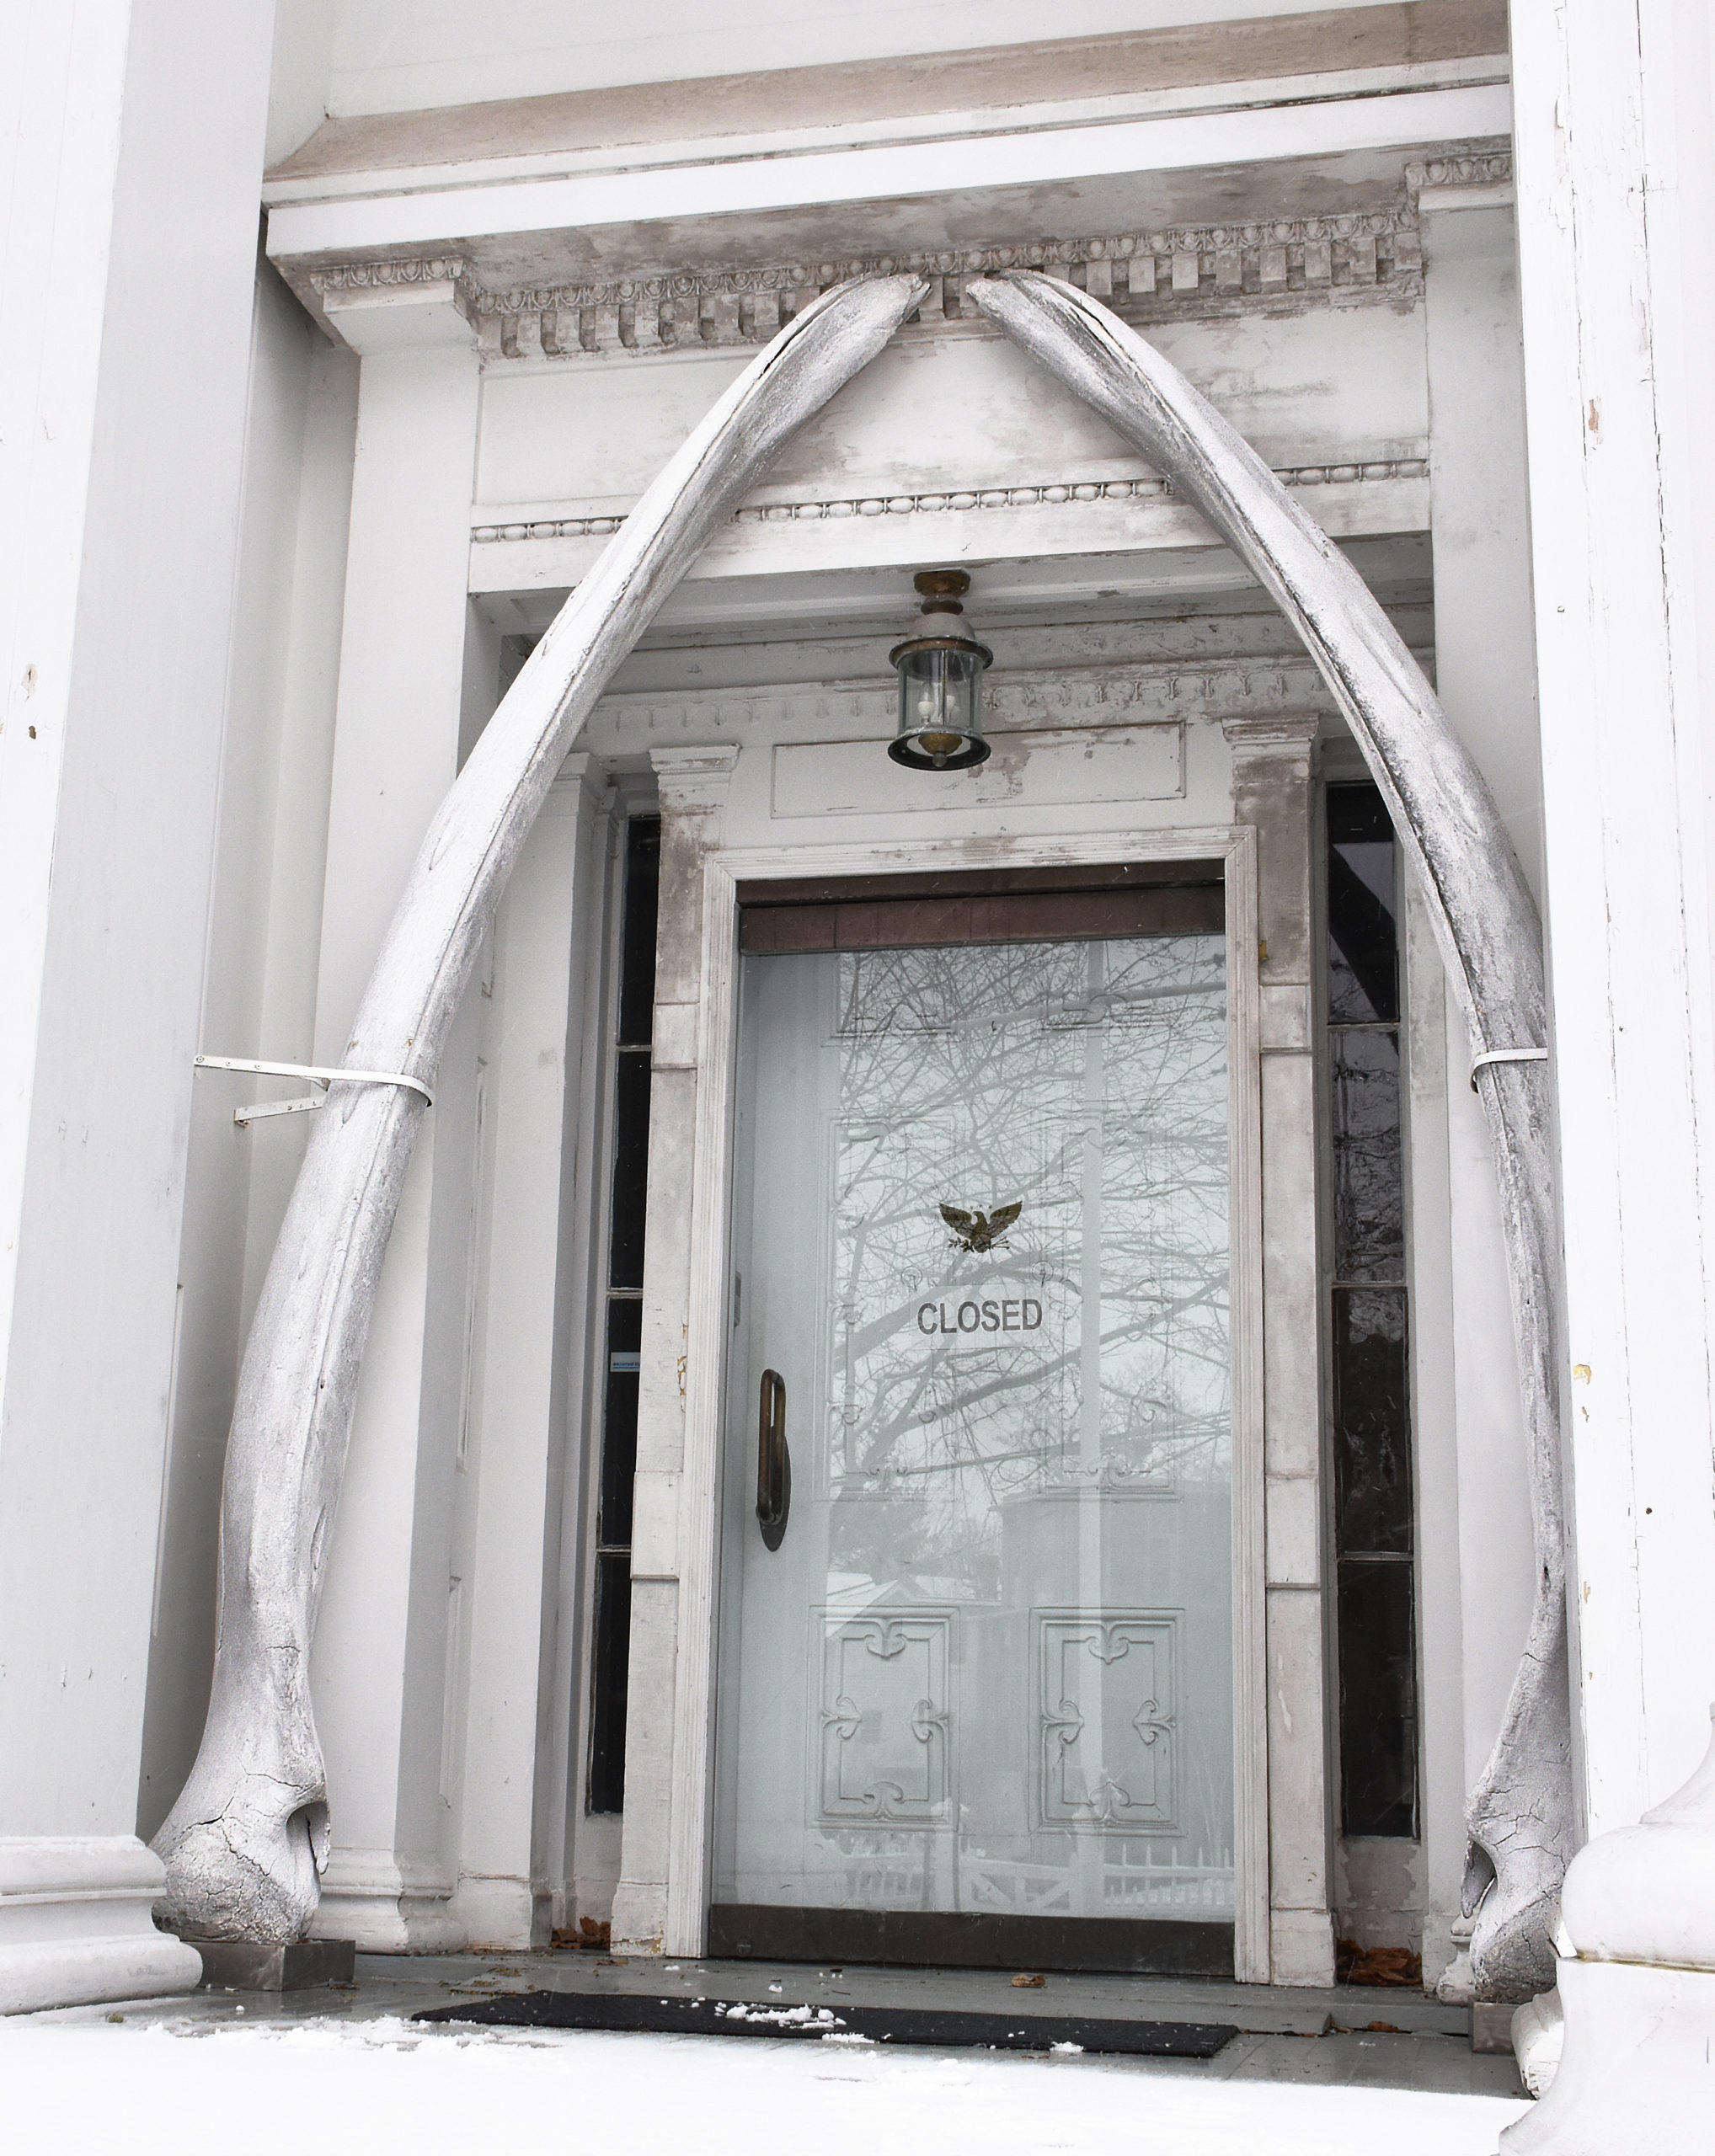 A right whale jaw (baleen) bone that has been incorporated into the entranceway of the Sag Harbor Whaling Museum on the west side of Main Street.  JEAN HELD